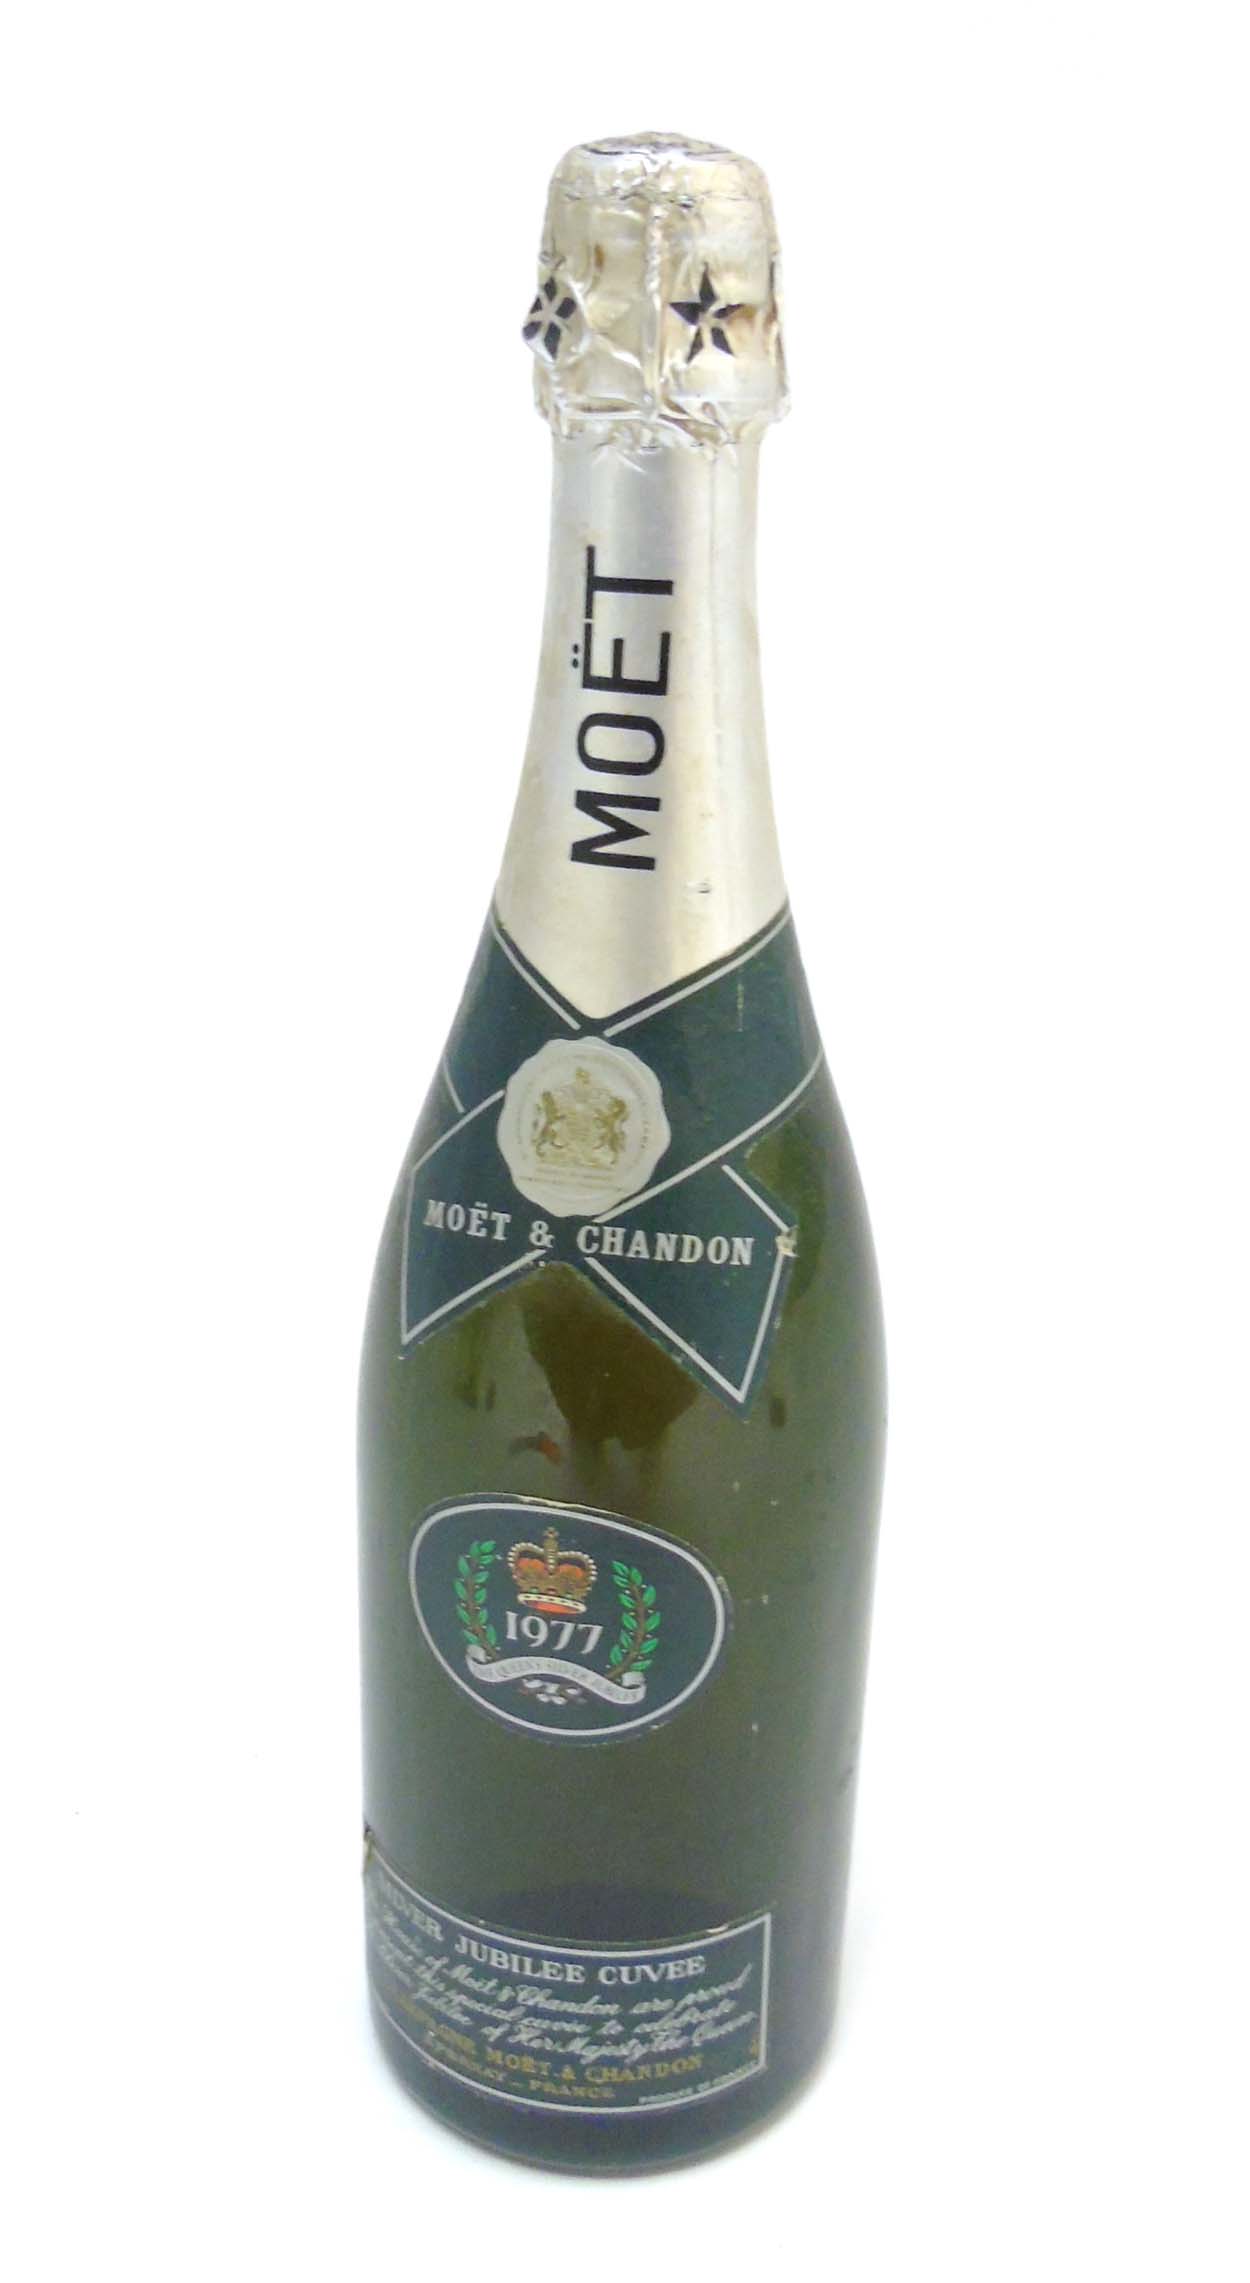 Champagne : A Moet & Chandon 1977 Silver Jubilee cuvee CONDITION: Please Note - we